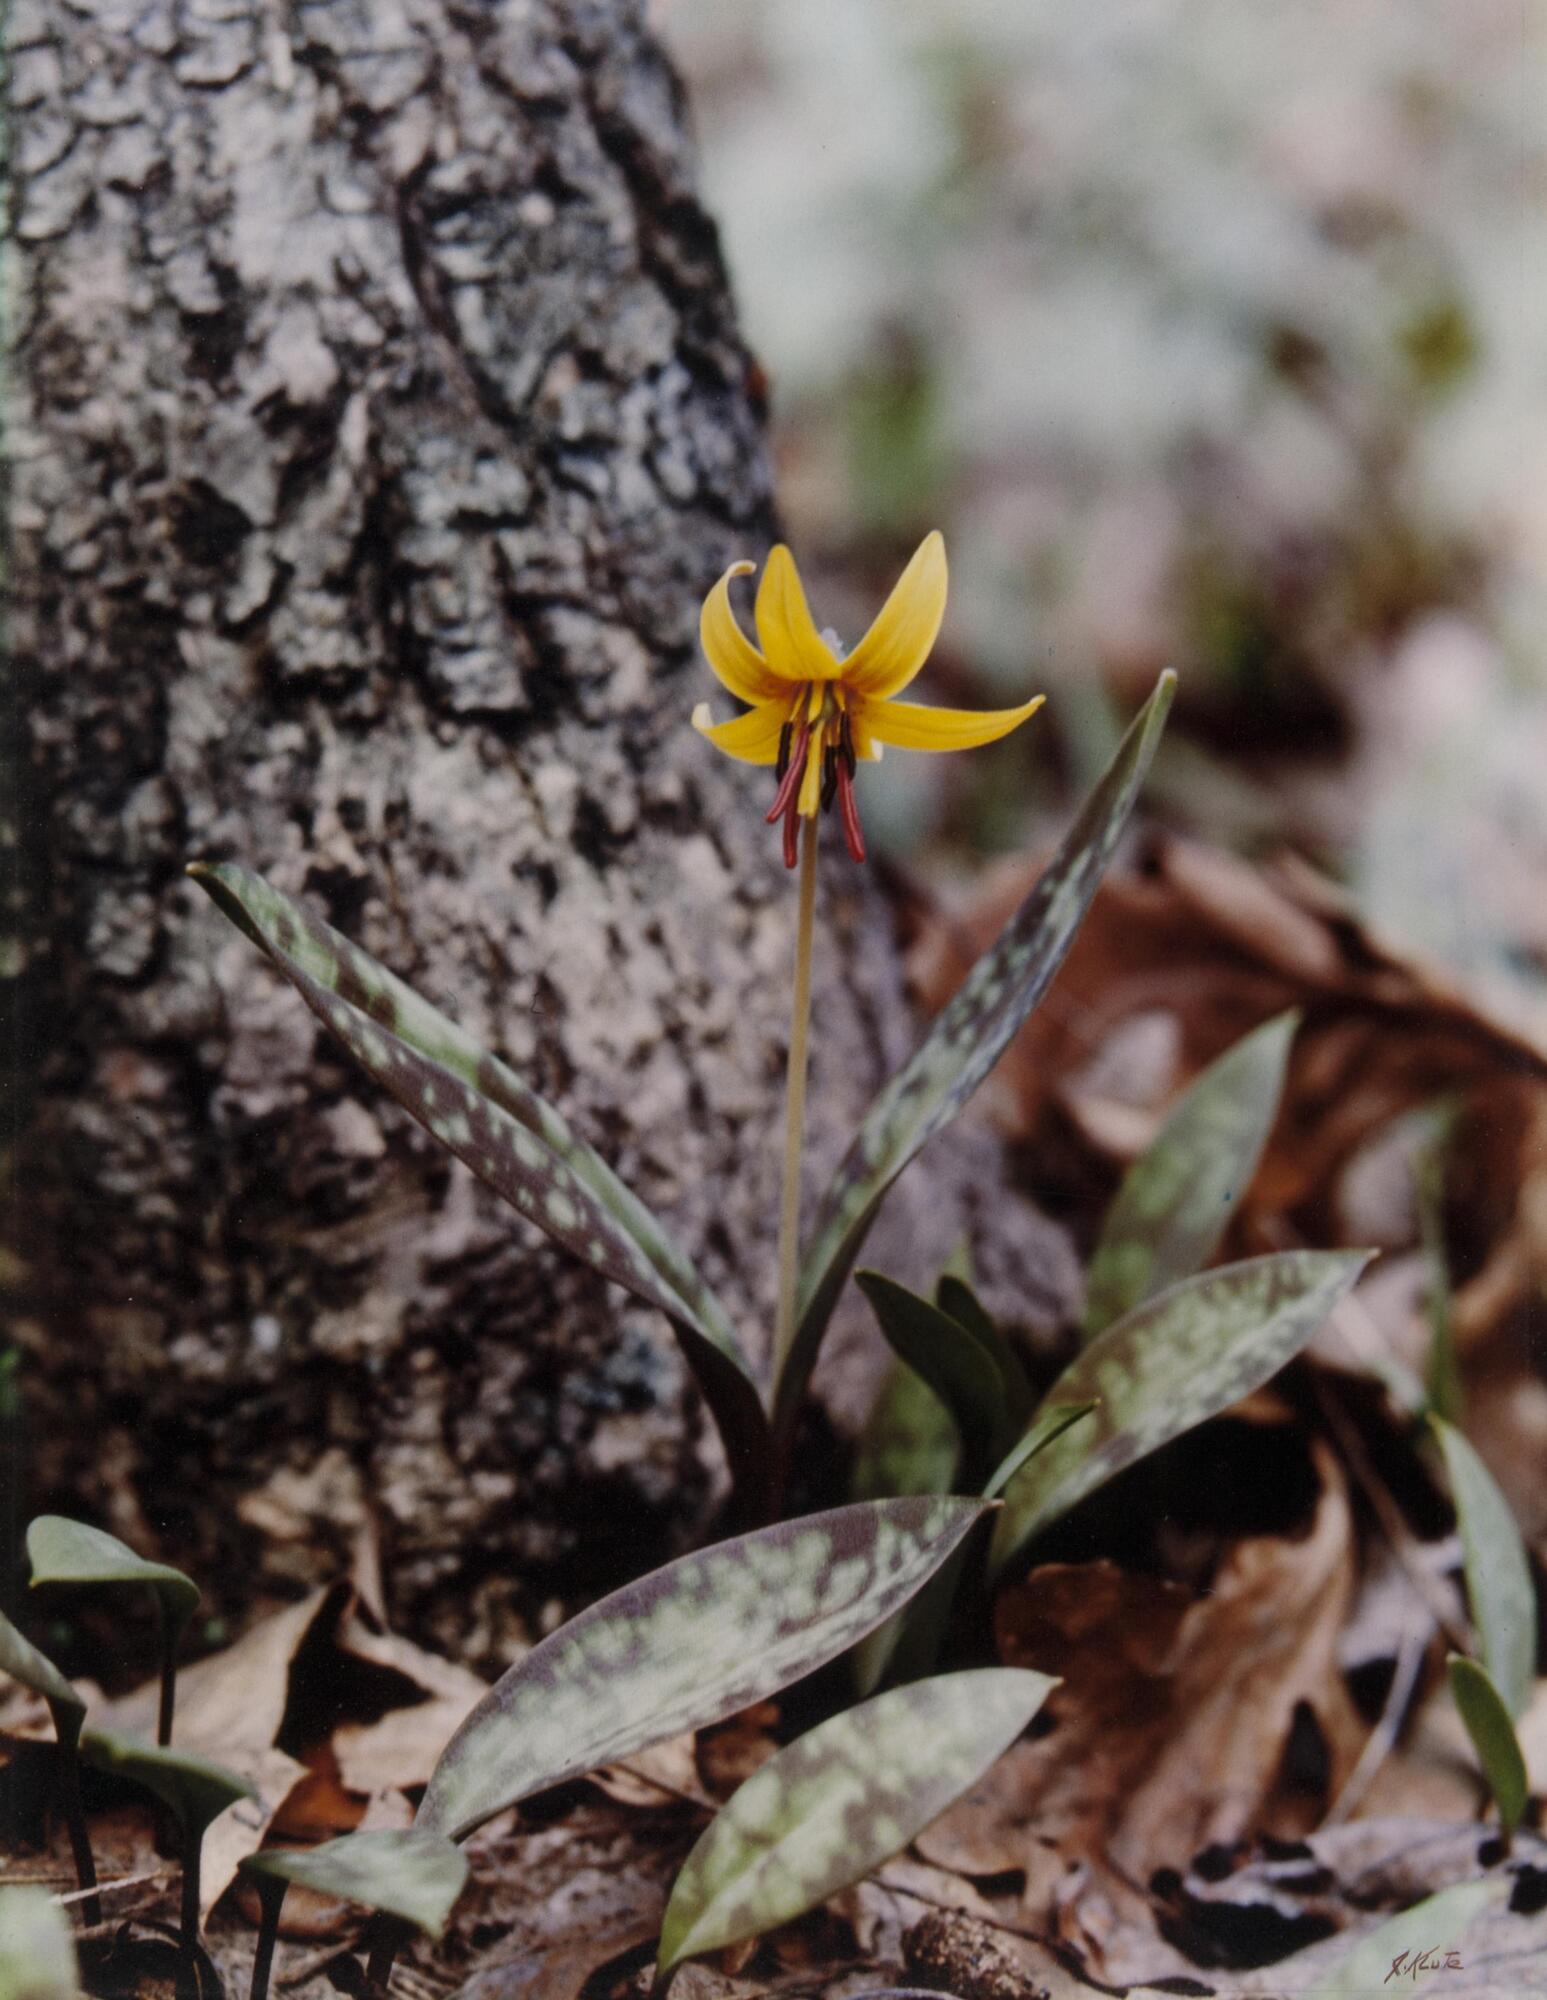 This is a photograph of a yellow flower with shallow depth of field. The tree and leaves on the forest bed behind the flower are out of focus, while the flower and its spotted leaves are the central focus of the composition. 